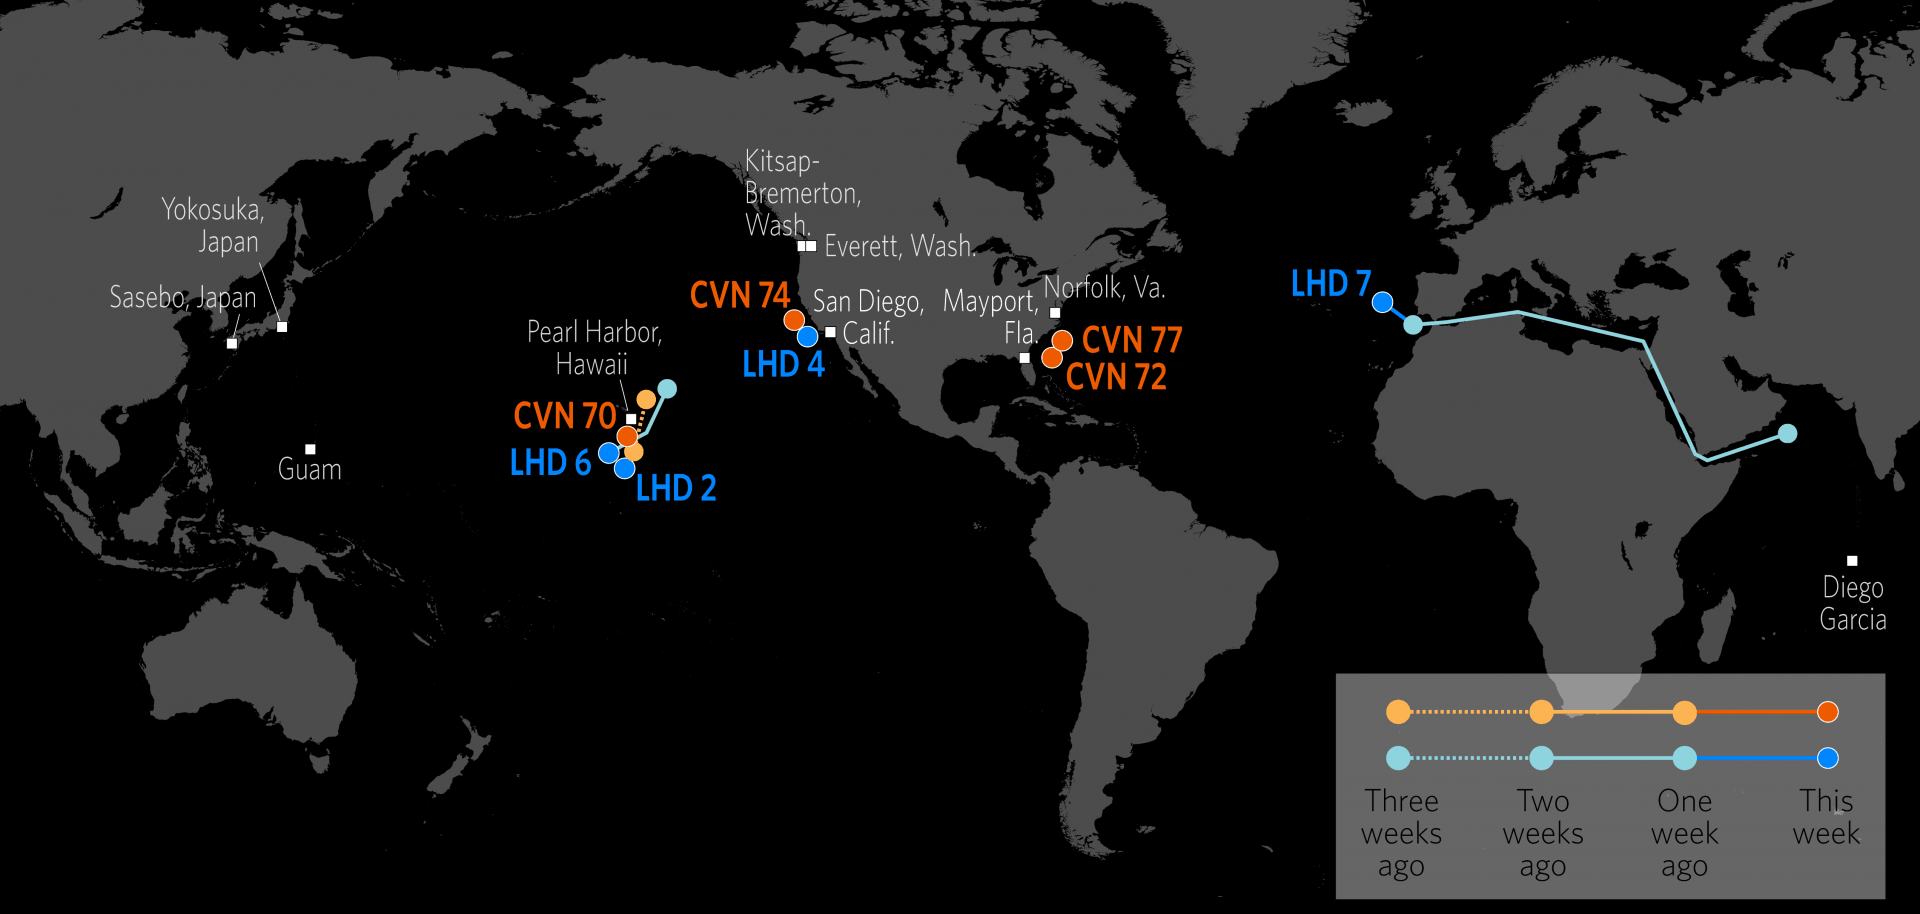 Naval Update Map: Aug. 2, 2018